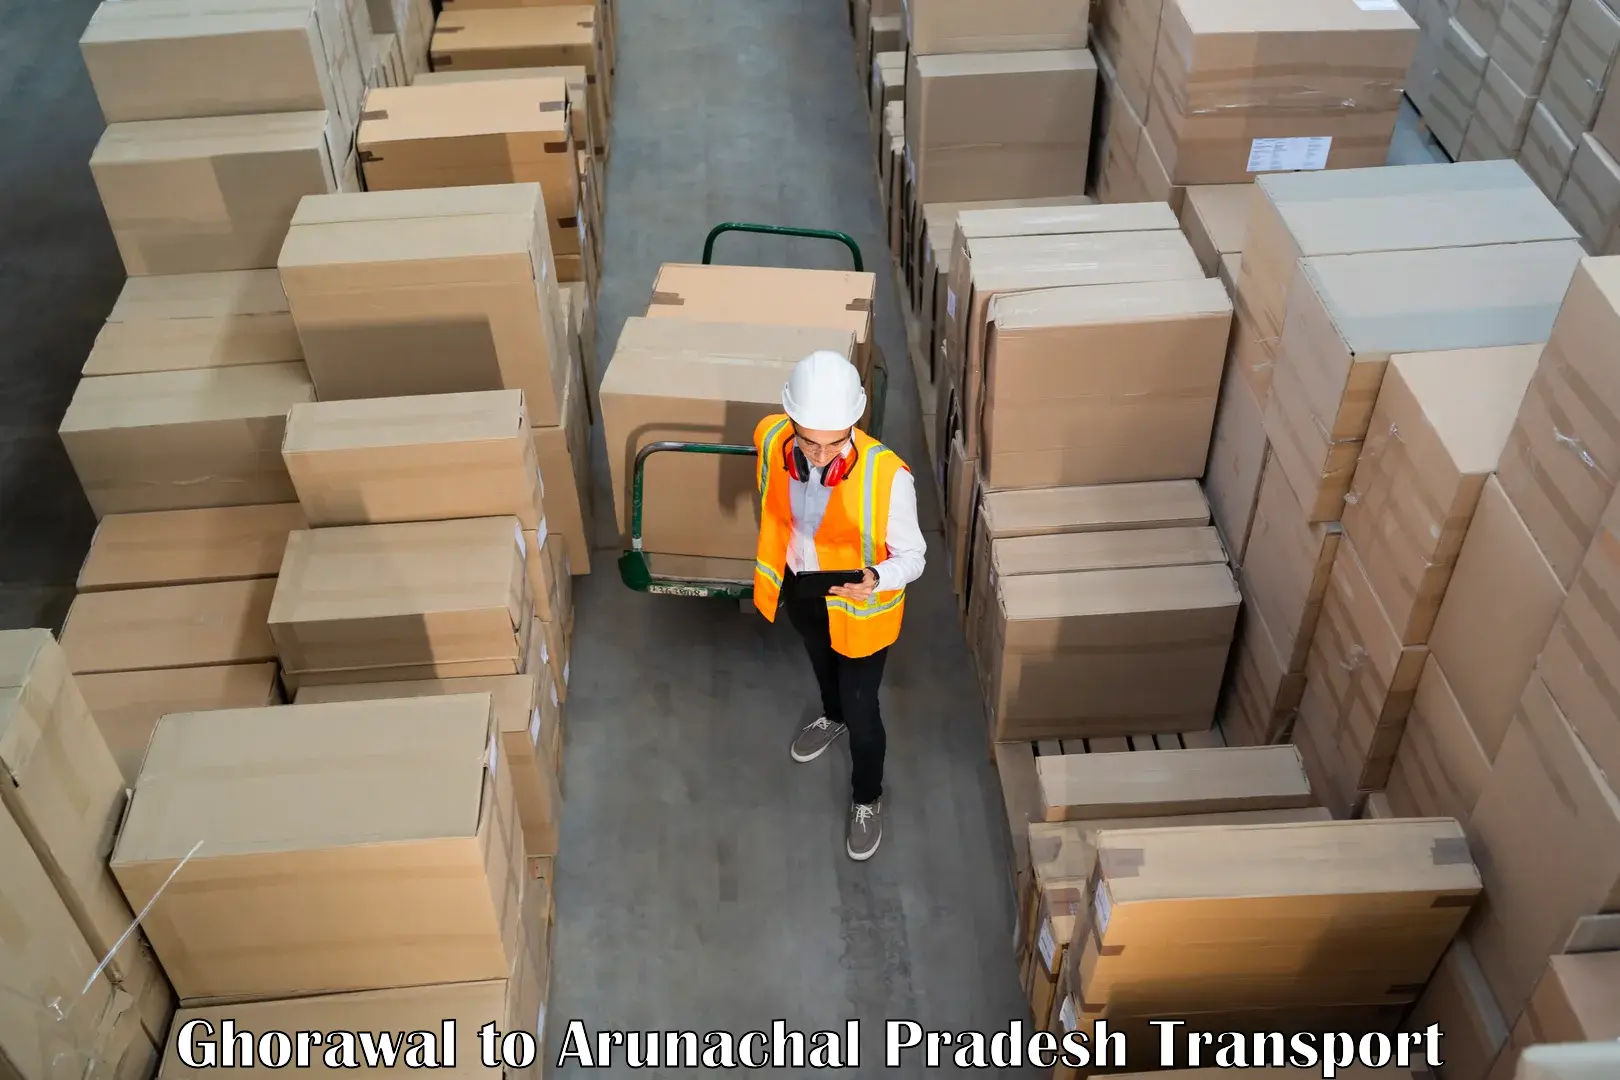 Truck transport companies in India Ghorawal to Pasighat